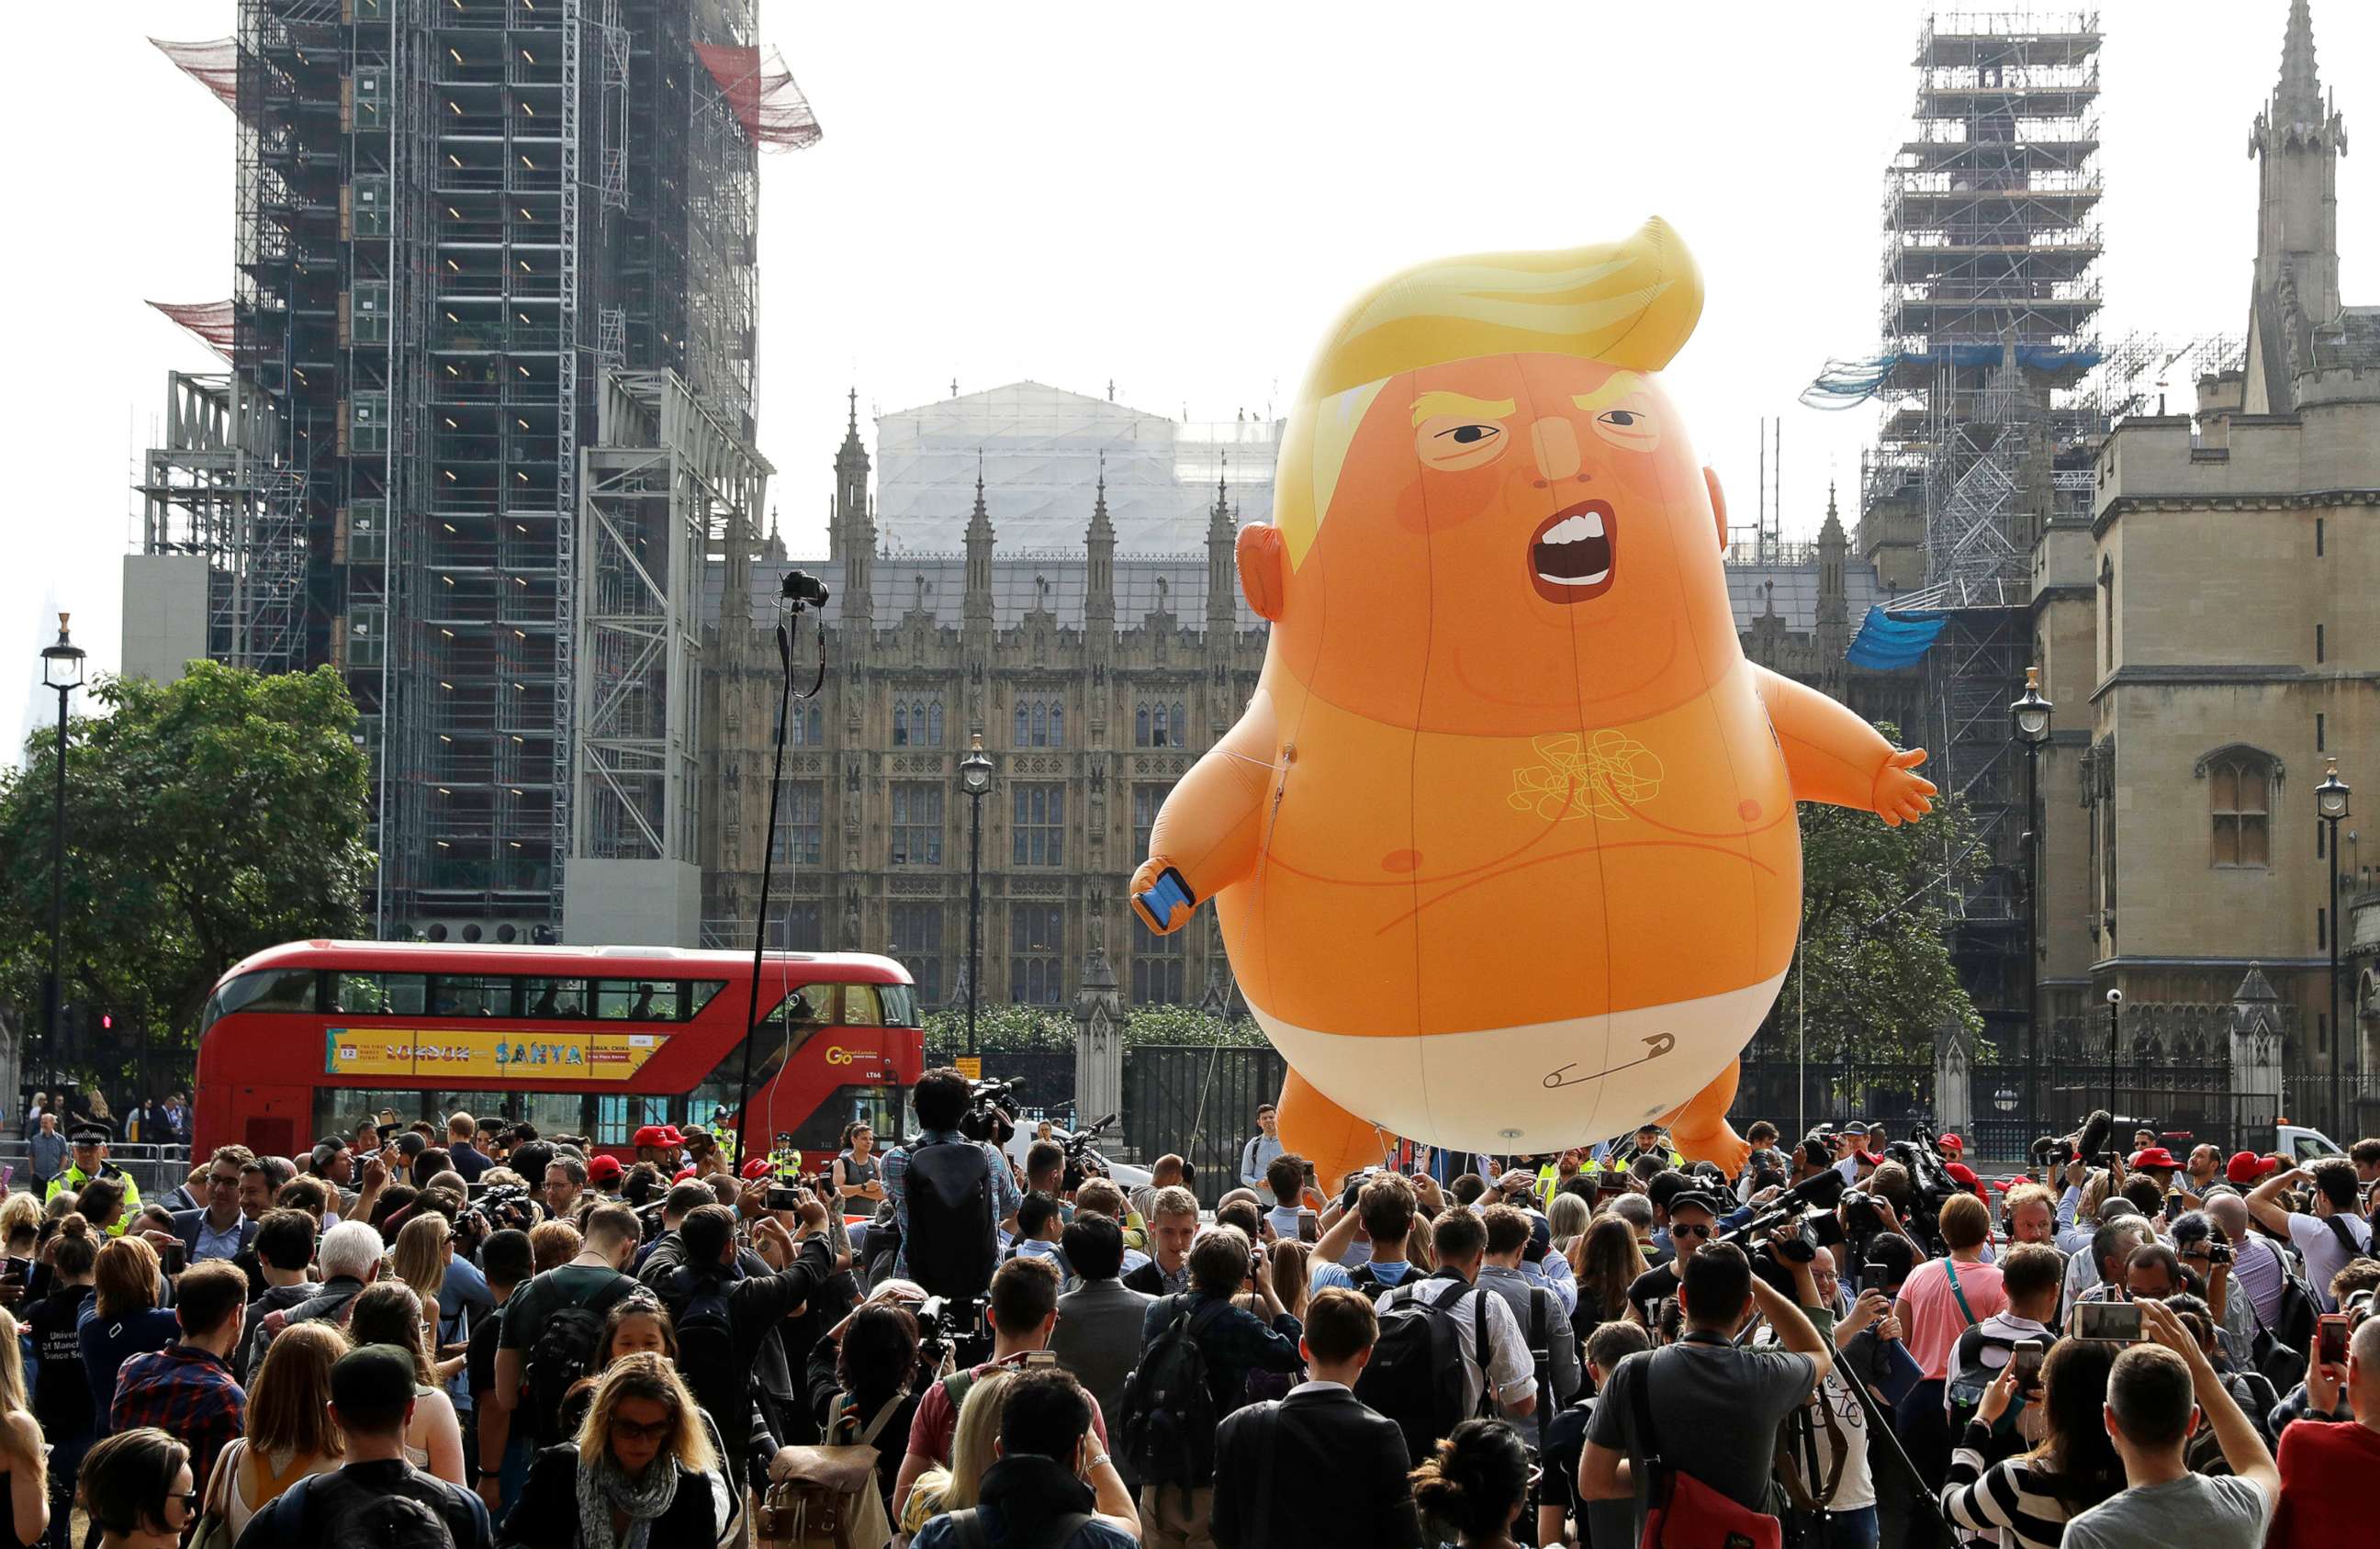 PHOTO: A six-meter high cartoon baby blimp of U.S. President Donald Trump is flown as a protest against his visit, in Parliament Square backdropped by the scaffolded Houses of Parliament and Big Ben in London, July 13, 2018.